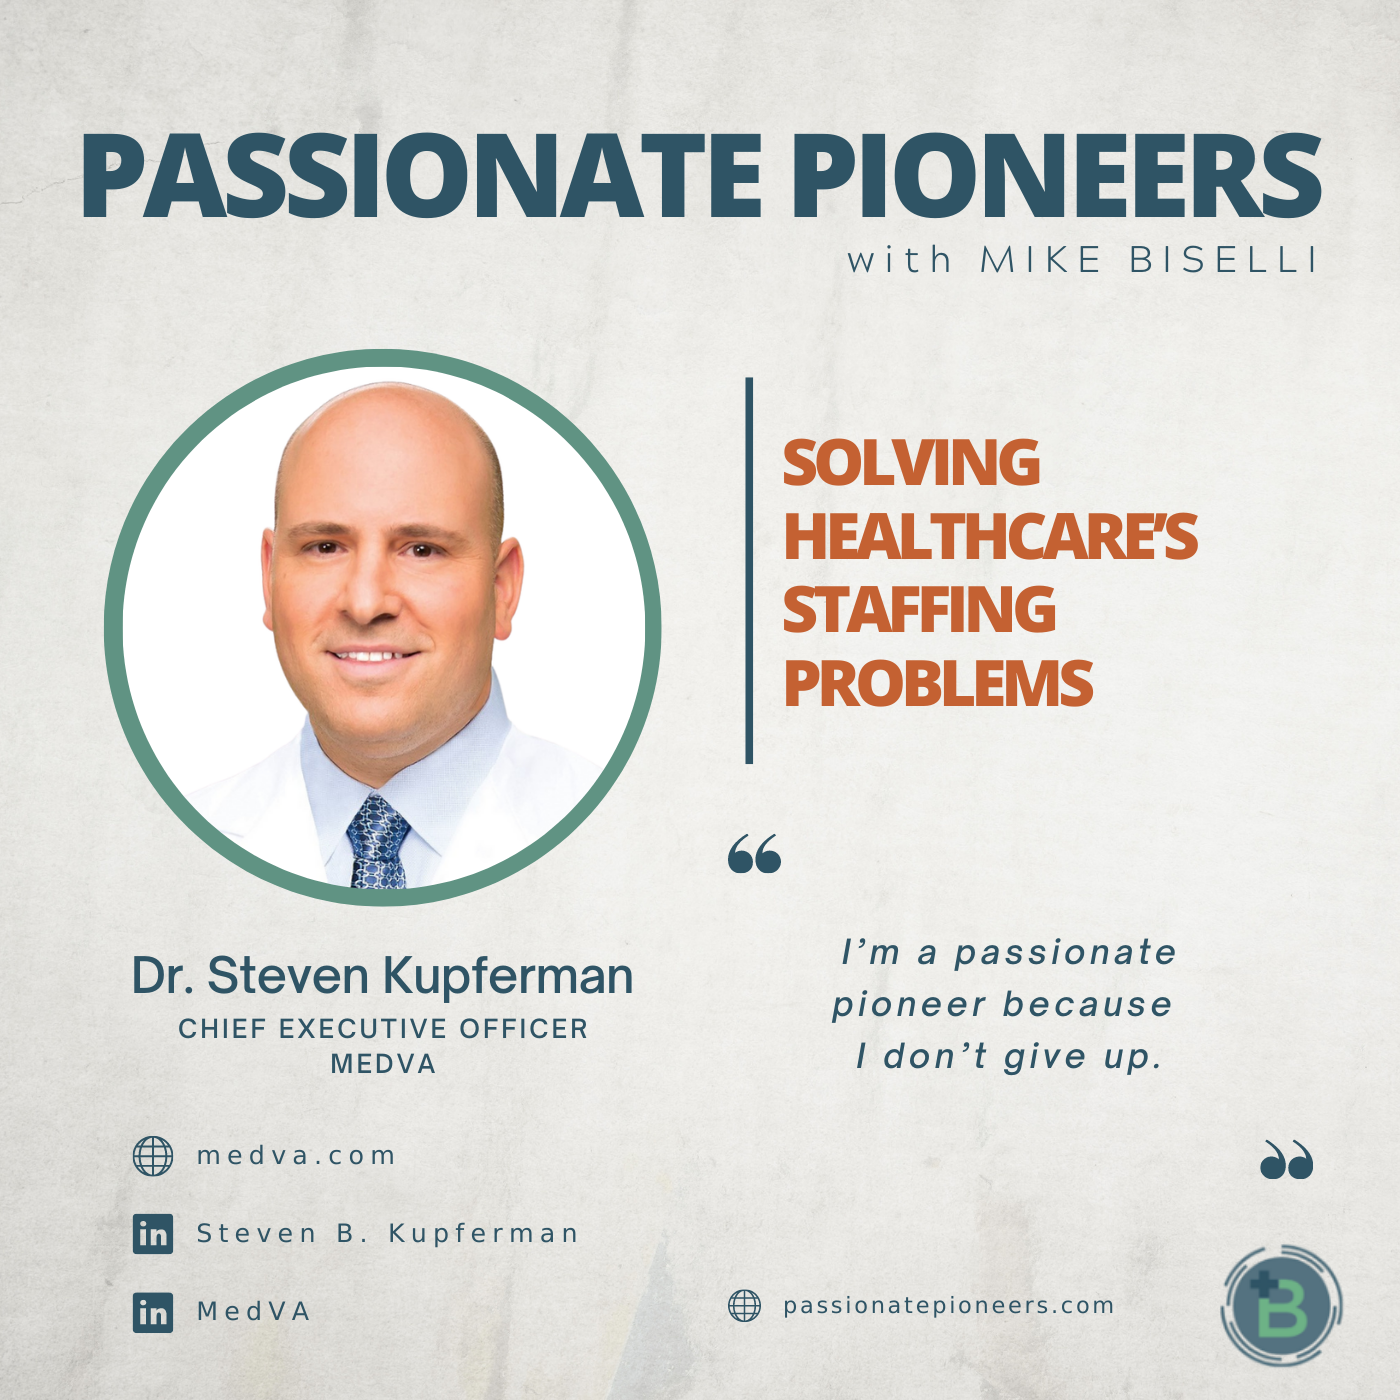 Solving Healthcare’s Staffing Problems with Dr. Steven Kupferman